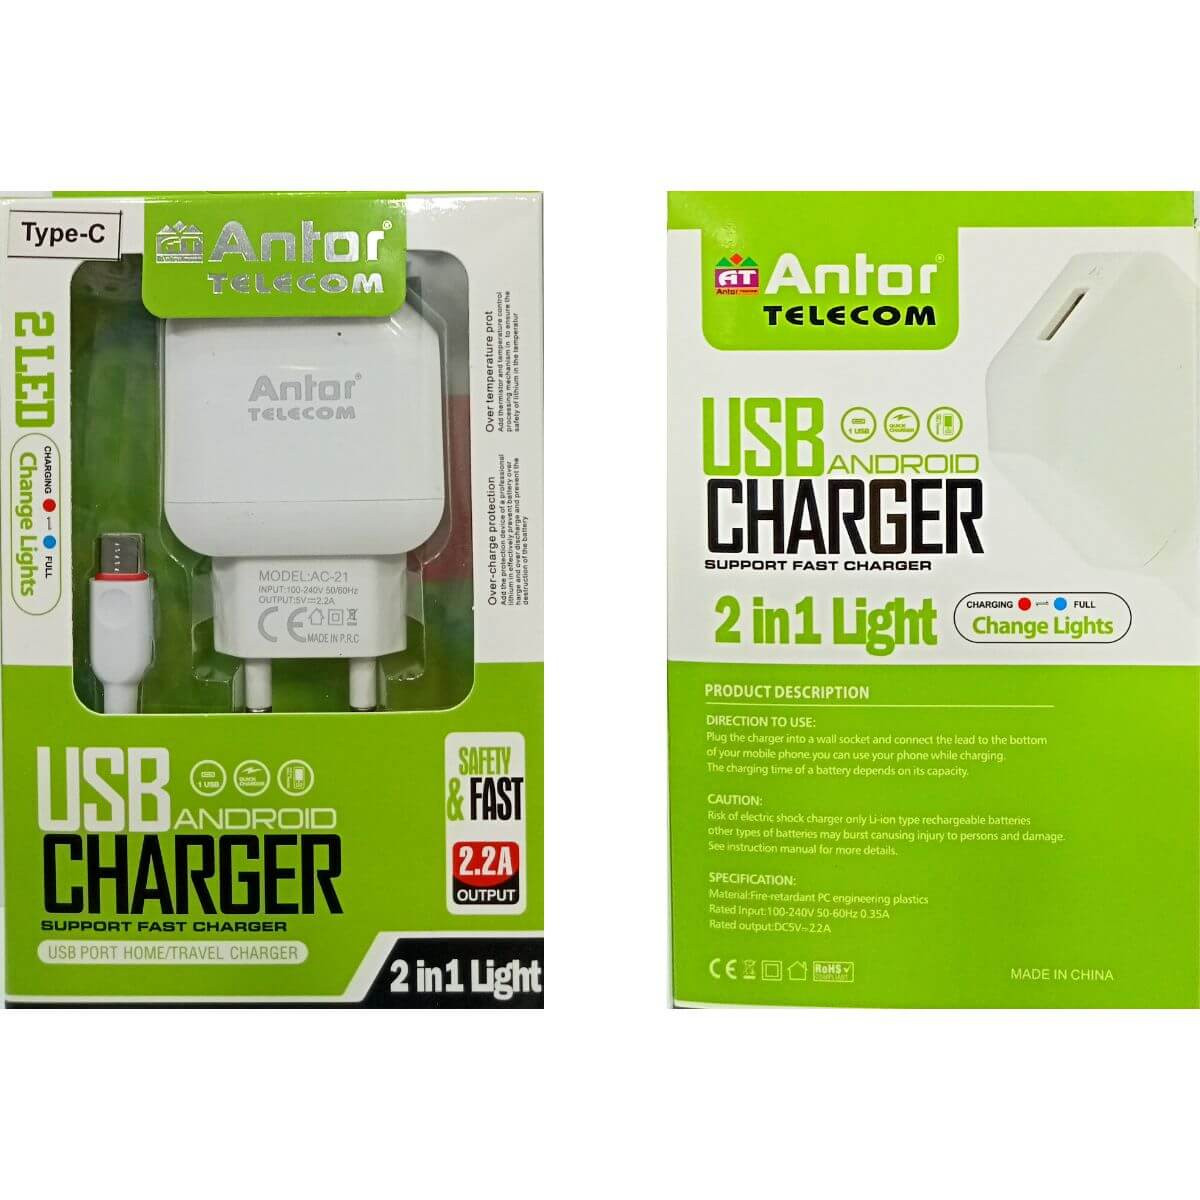 Antor 2.2A Type-C USB Android Charger BD